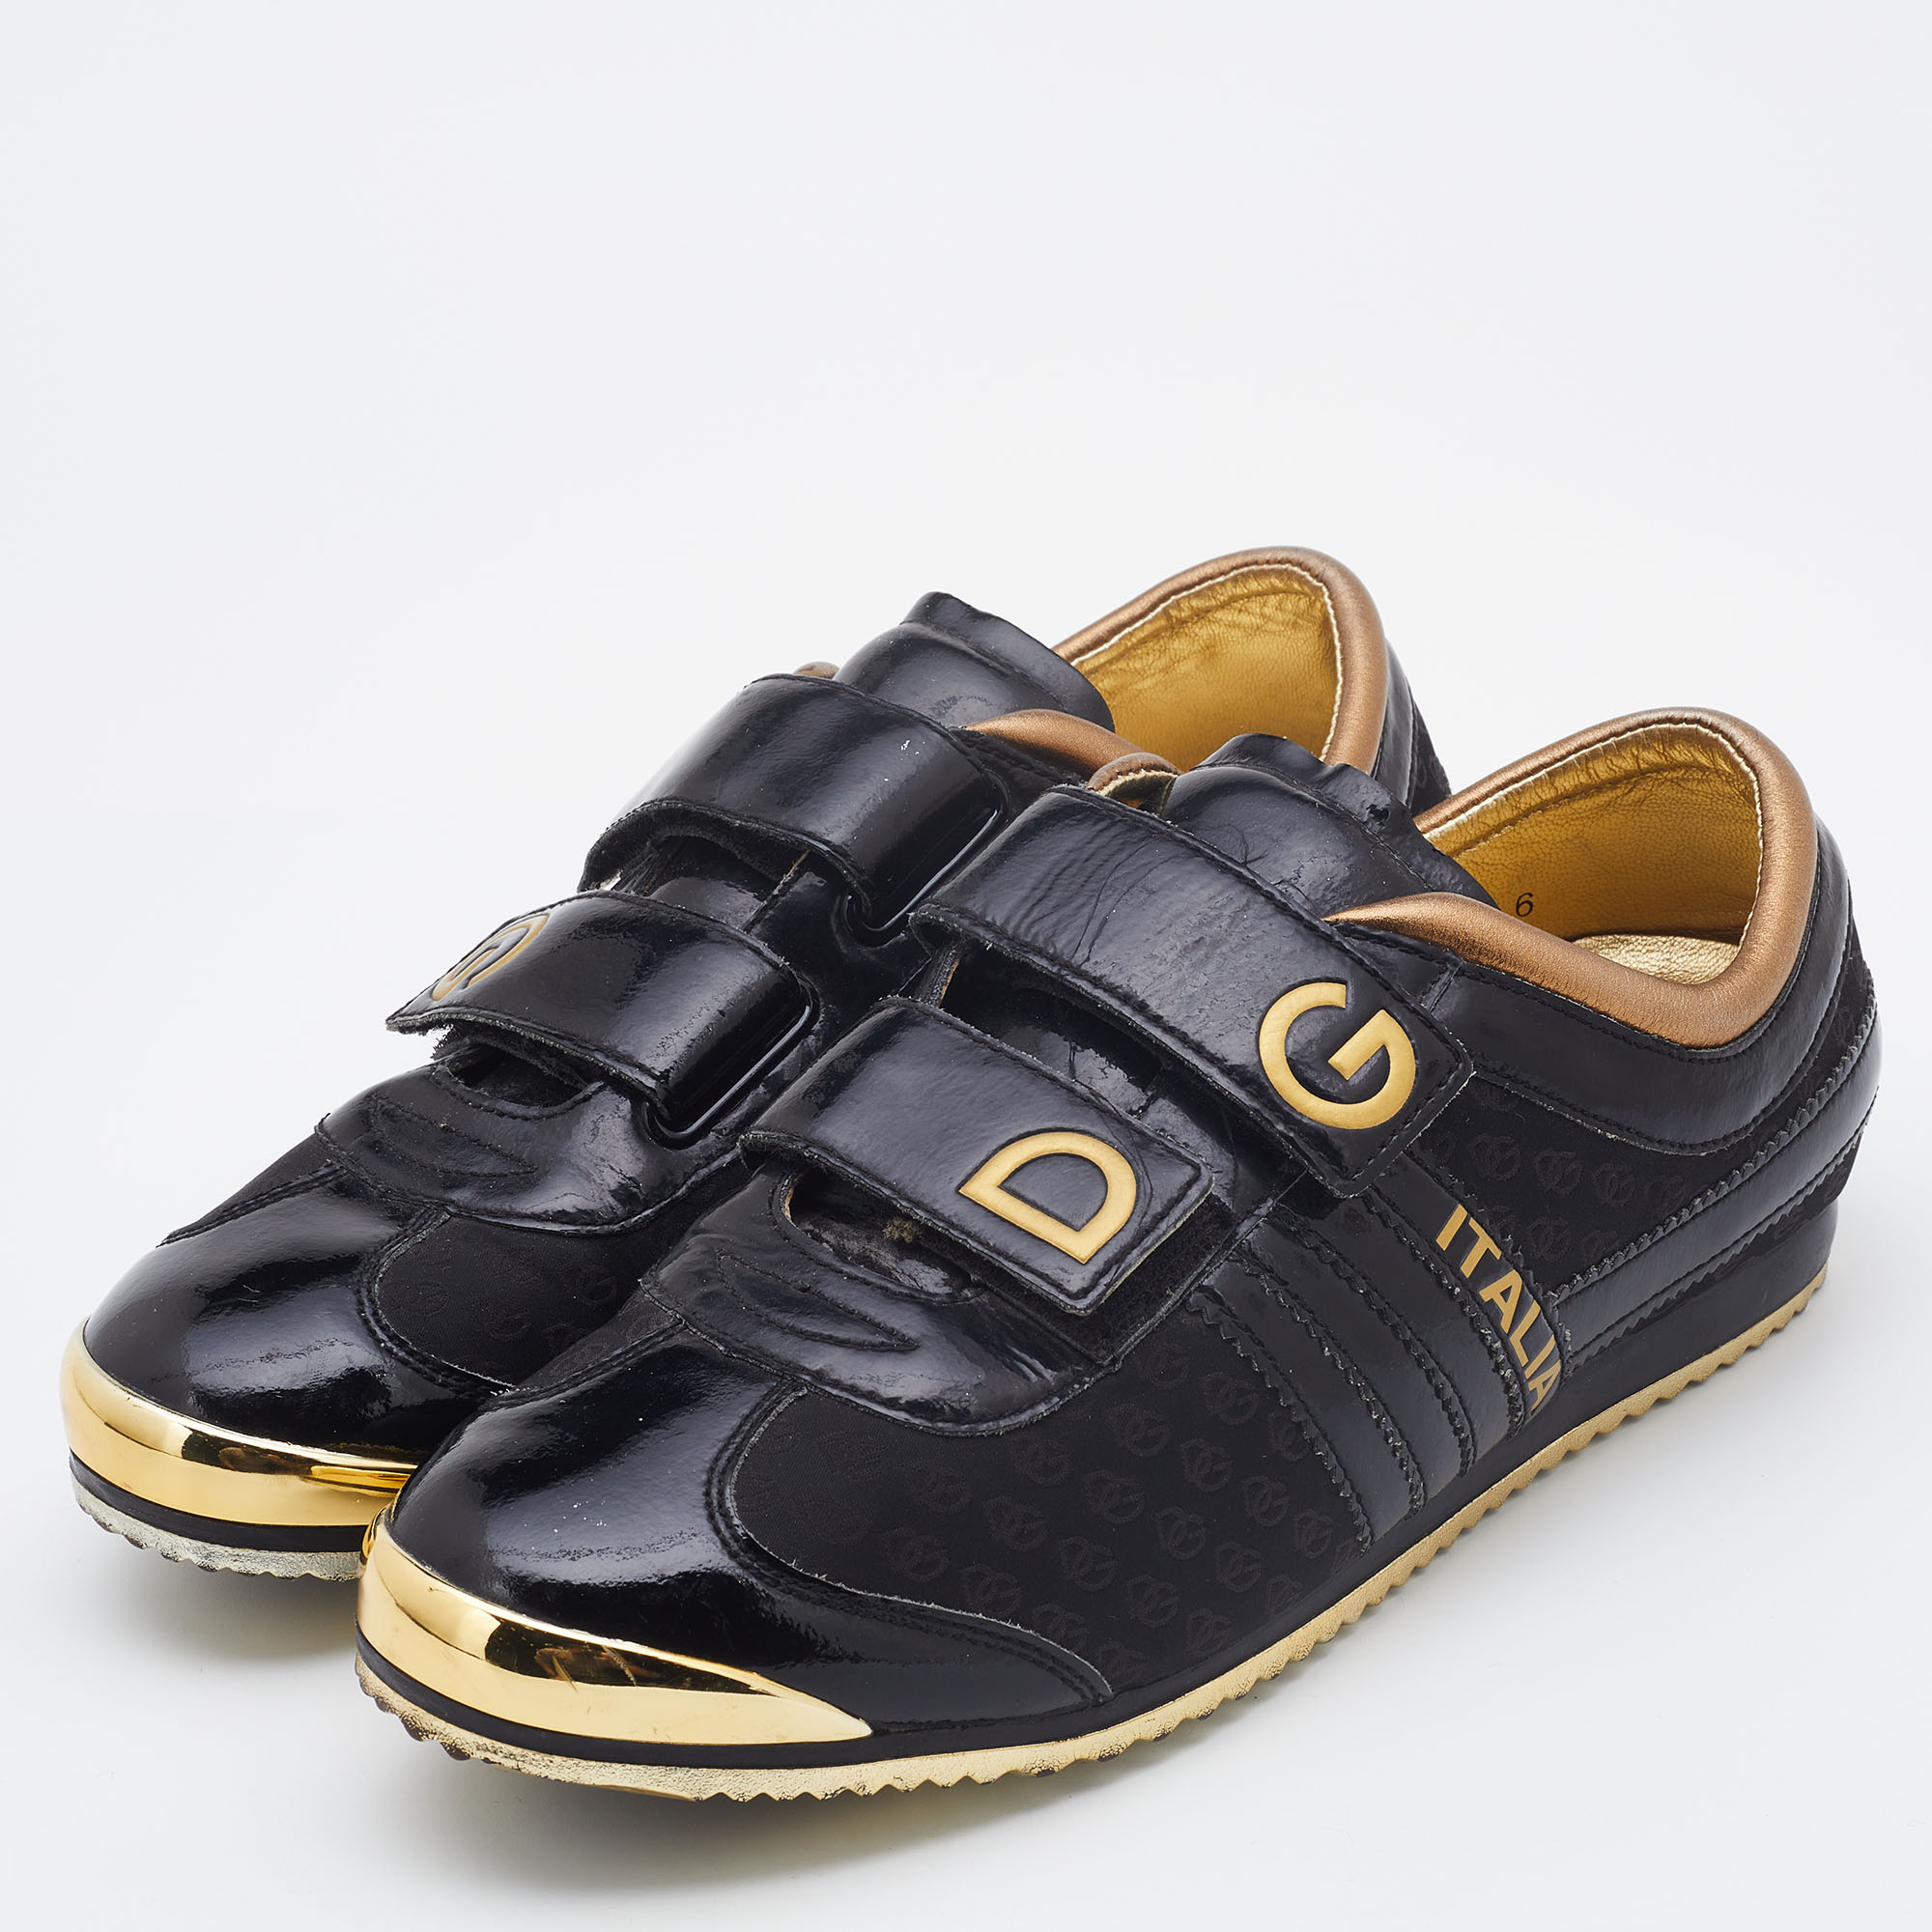 

Dolce & Gabbana Black/Gold Patent Leather and Fabric DG Low Top Sneakers Size